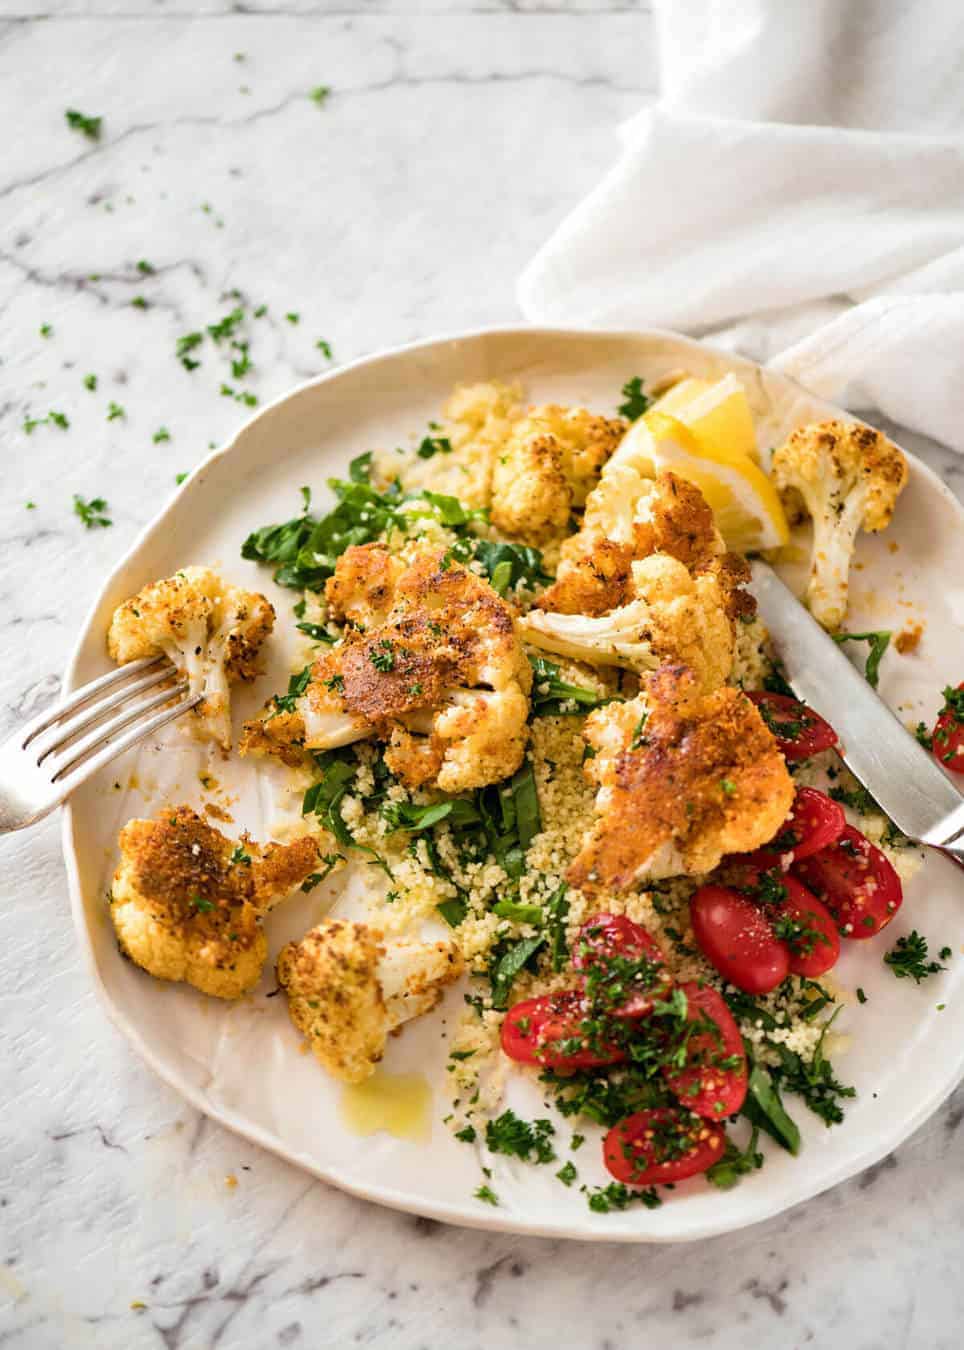 Try this Roasted Parmesan Crusted Cauliflower for dinner tonight! Serve it as a side or as a main meal, or how about as a healthy, low carb snack at a gathering? It's quick, easy and off-the-charts delicious! recipetineats.com